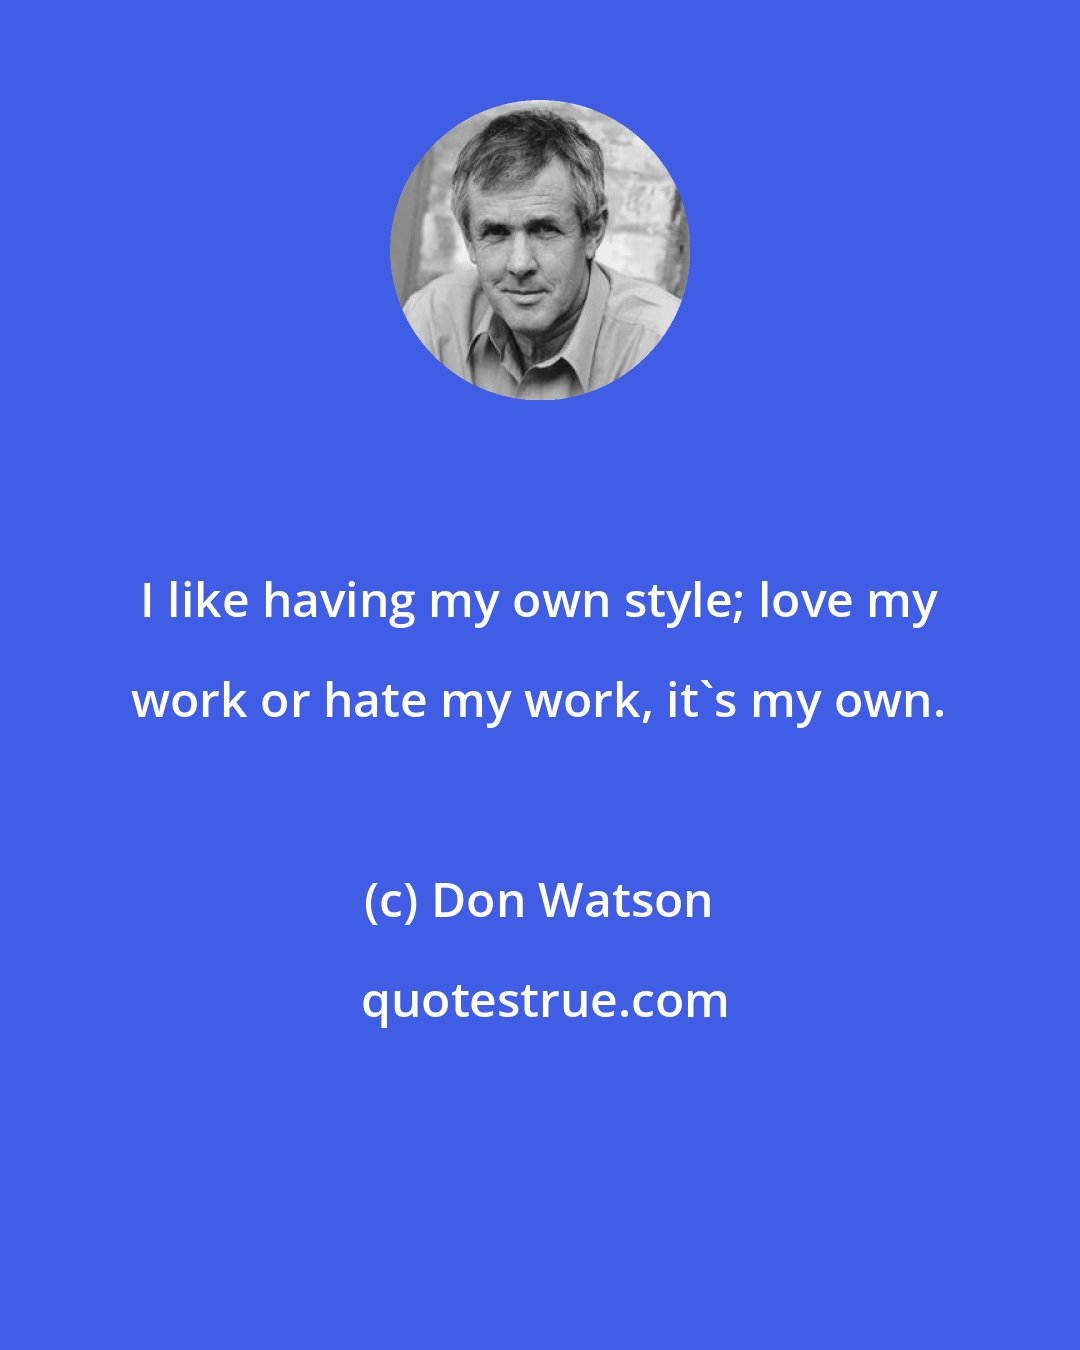 Don Watson: I like having my own style; love my work or hate my work, it's my own.